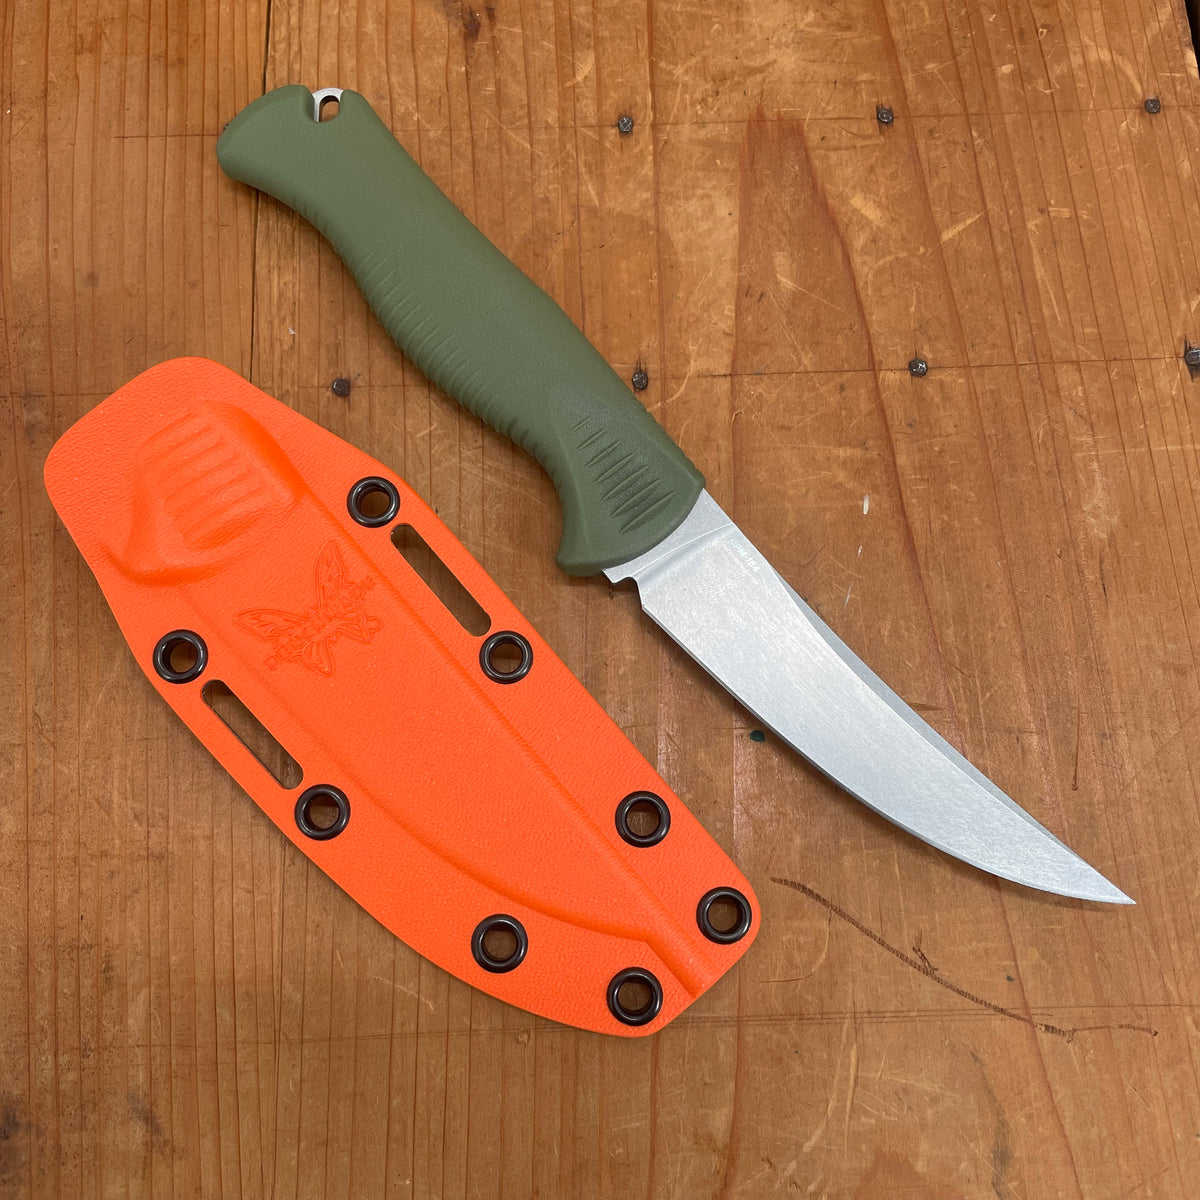 Benchmade 15505 Meatcrafter 4" Trailing Point CPM-154 Fixed Blade Dark Olive Santoprene Handle with Sheath